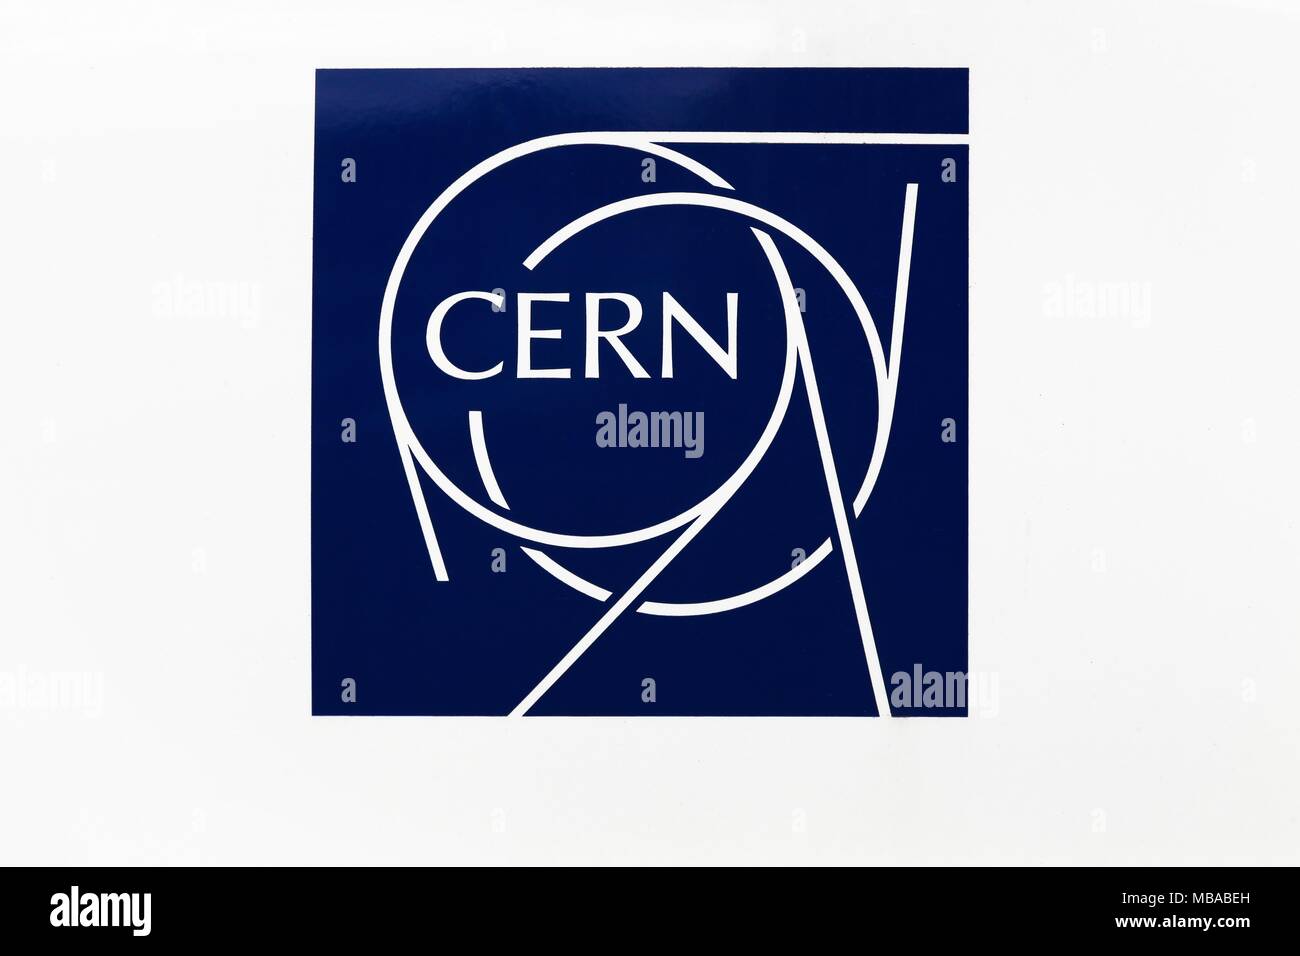 Meyrin, Switzerland - October 1, 2017: The European Organization for Nuclear Research logo known as CERN Stock Photo